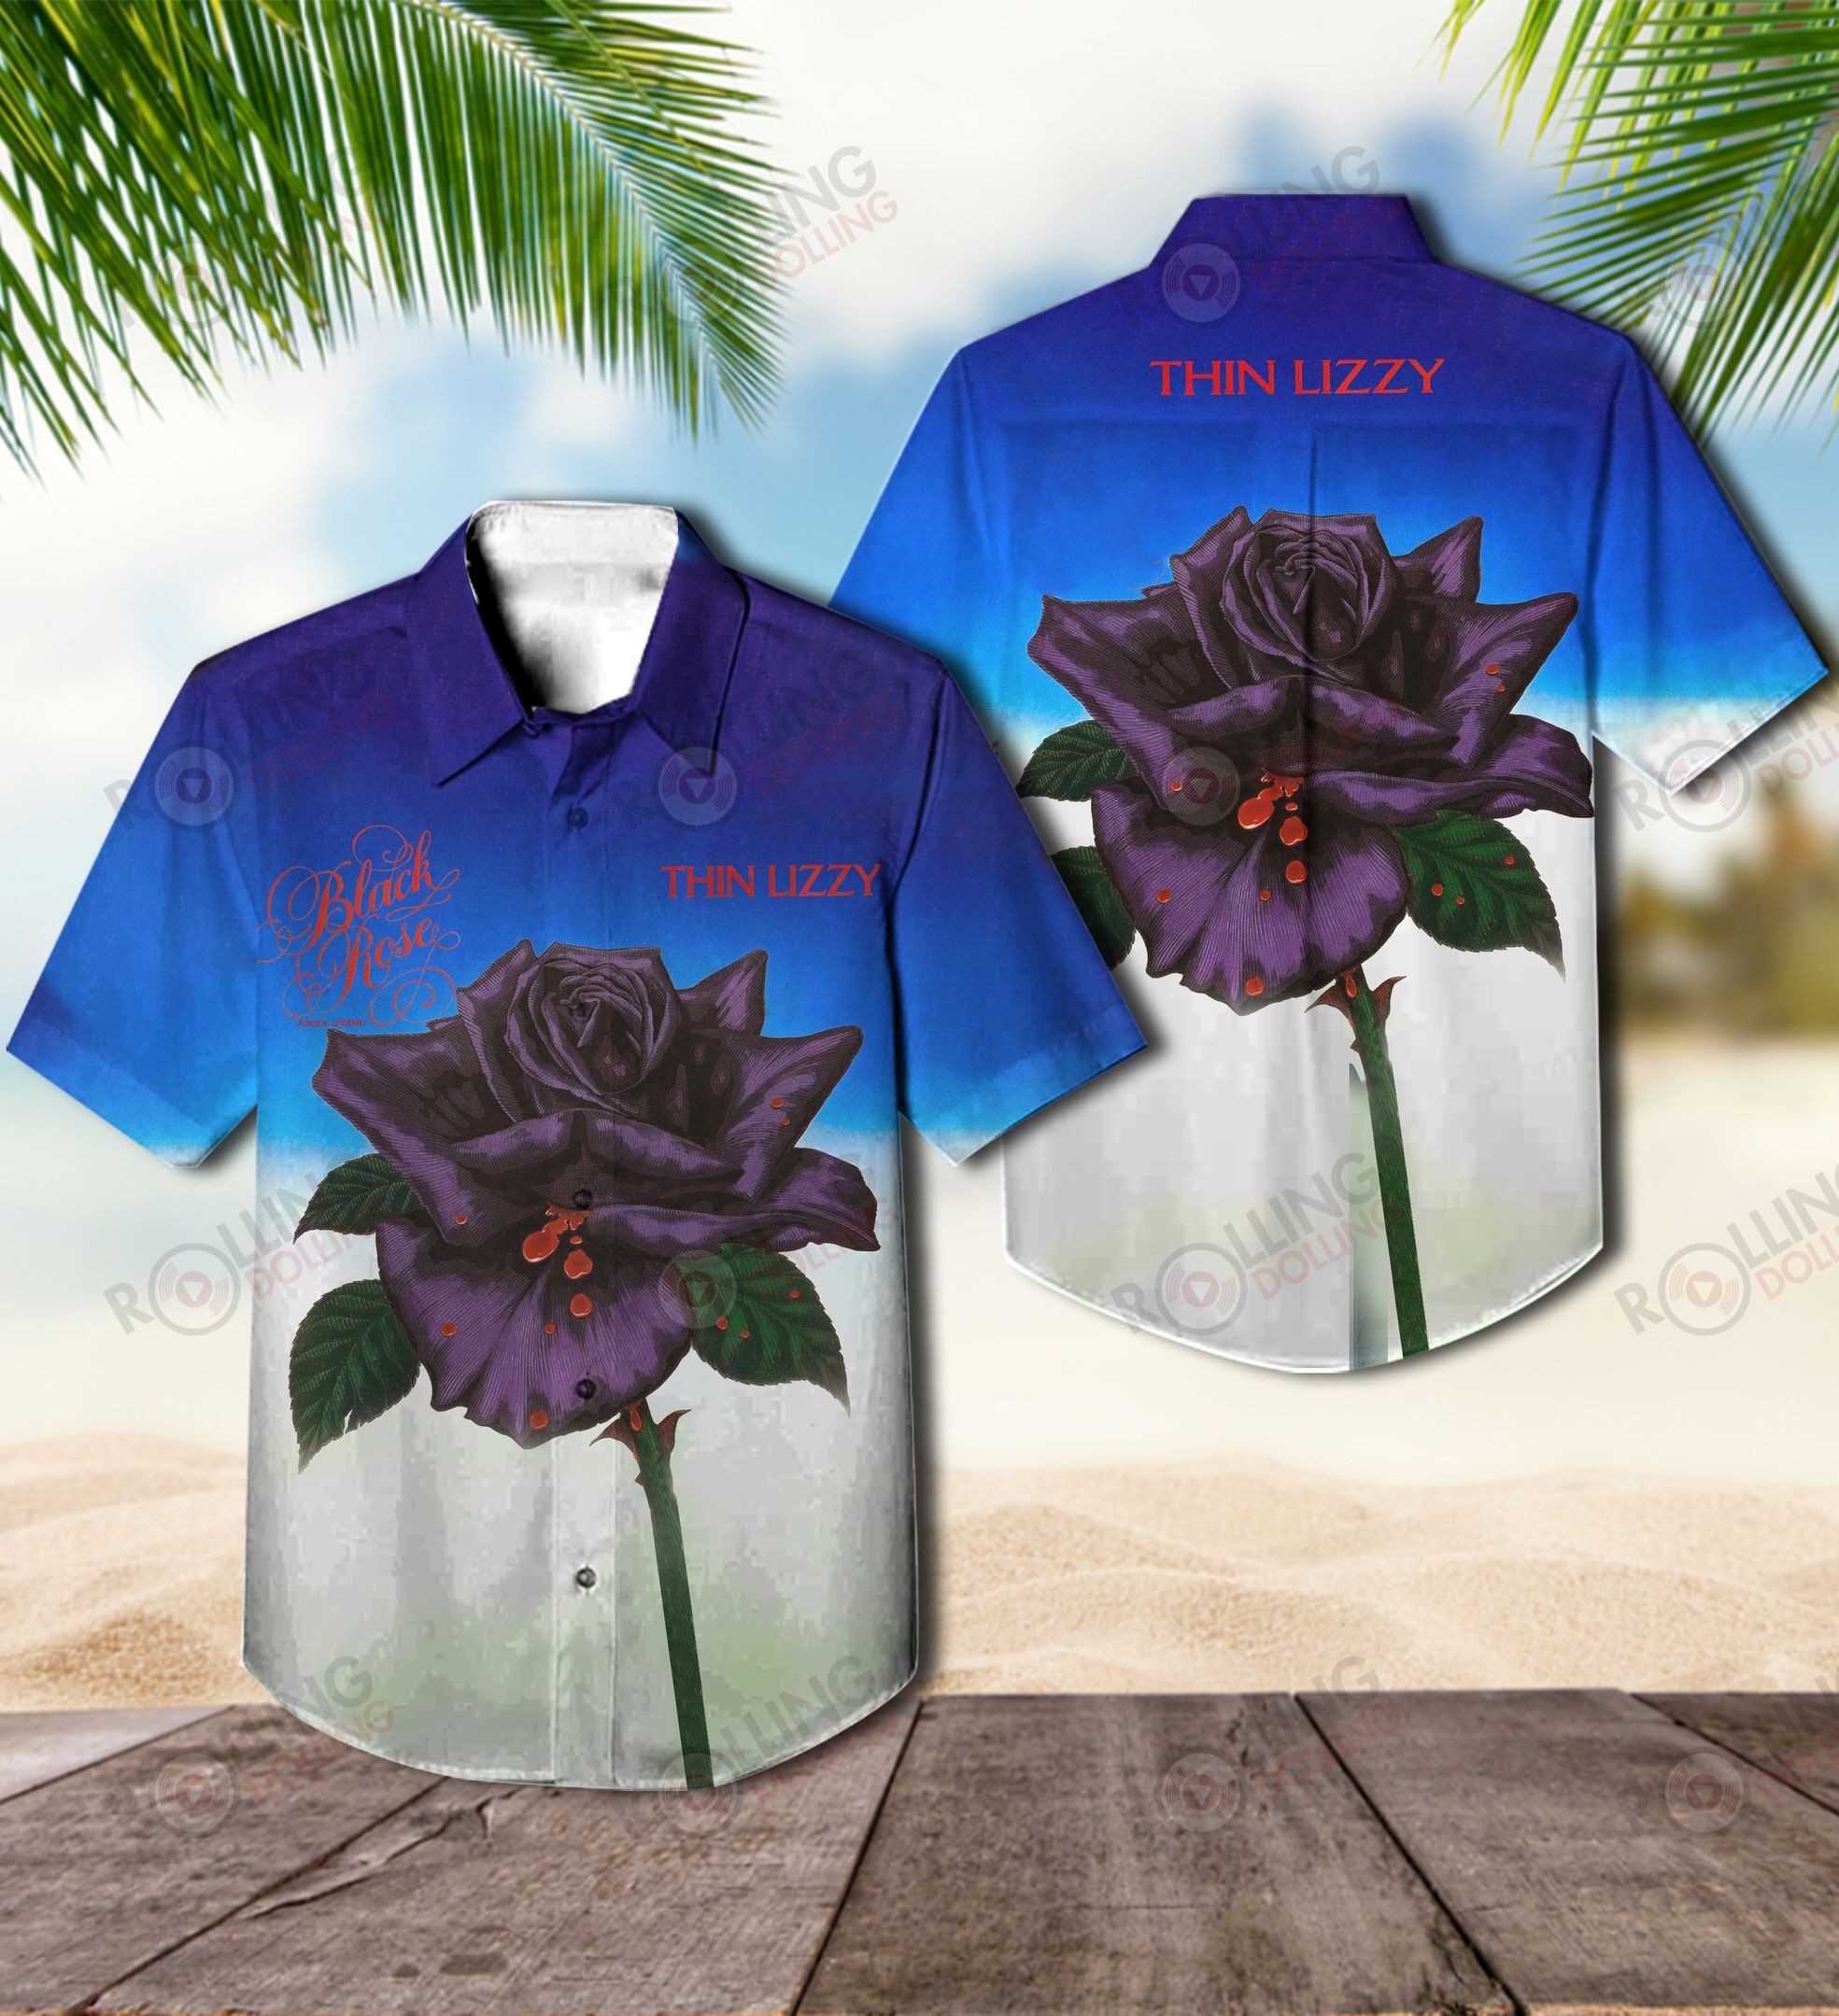 For summer, consider wearing This Amazing Hawaiian Shirt shirt in our store 75